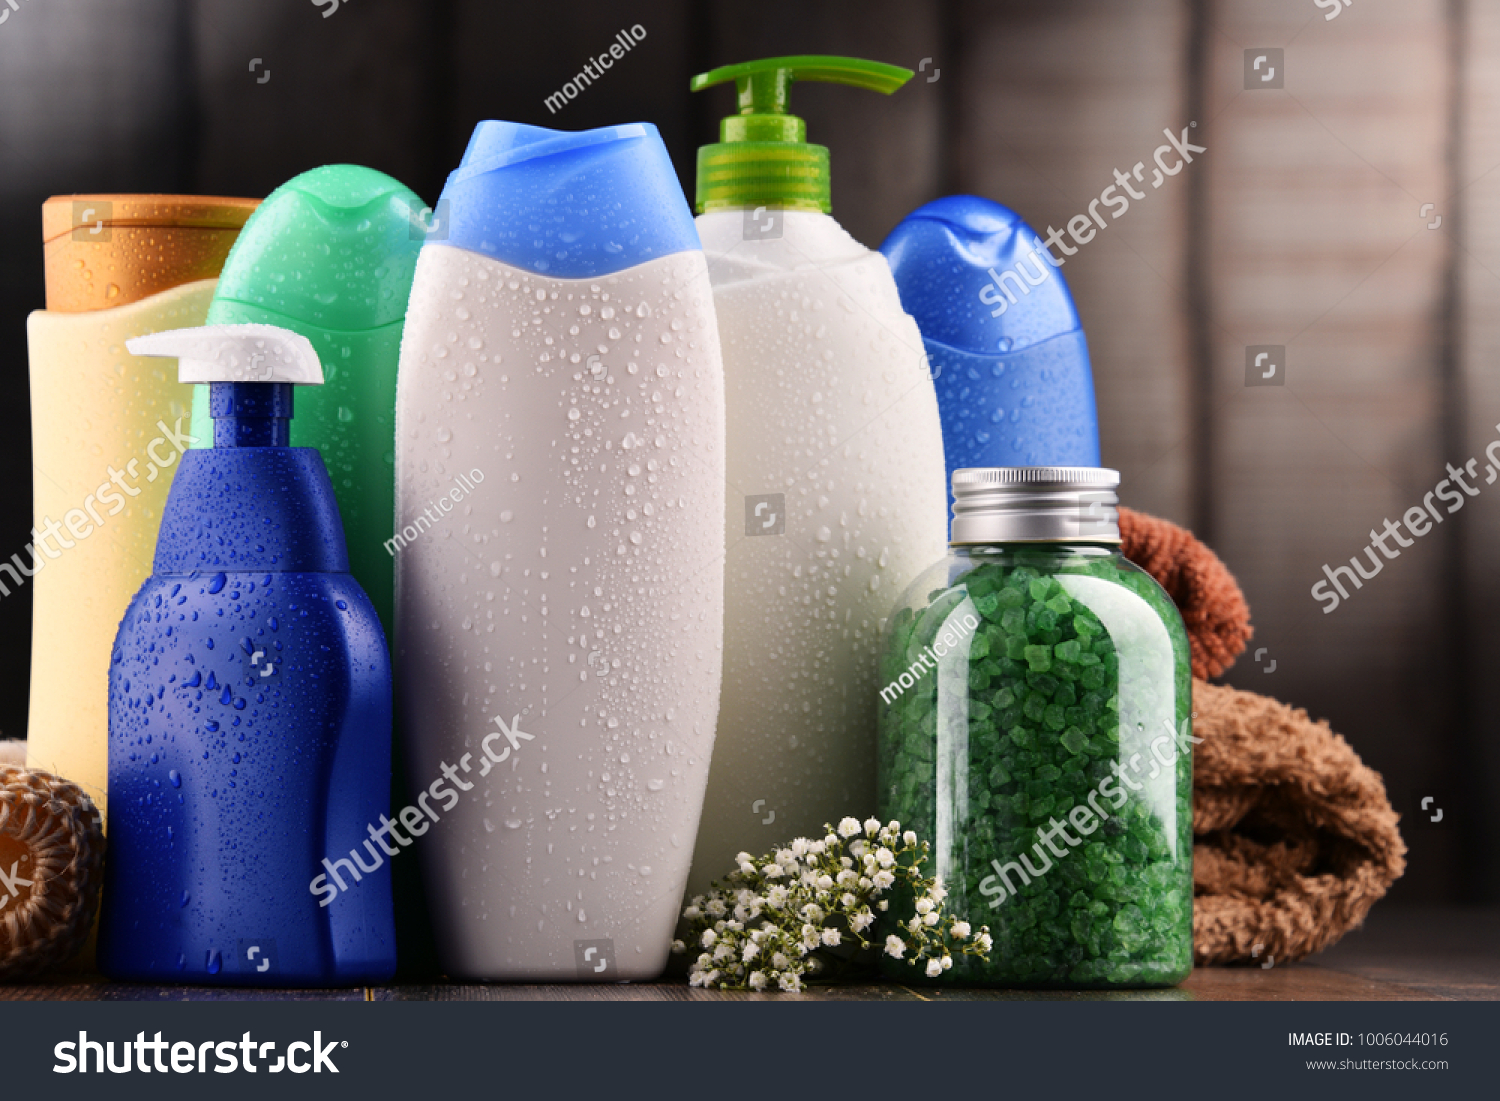 Plastic bottles of body care and beauty products. #1006044016